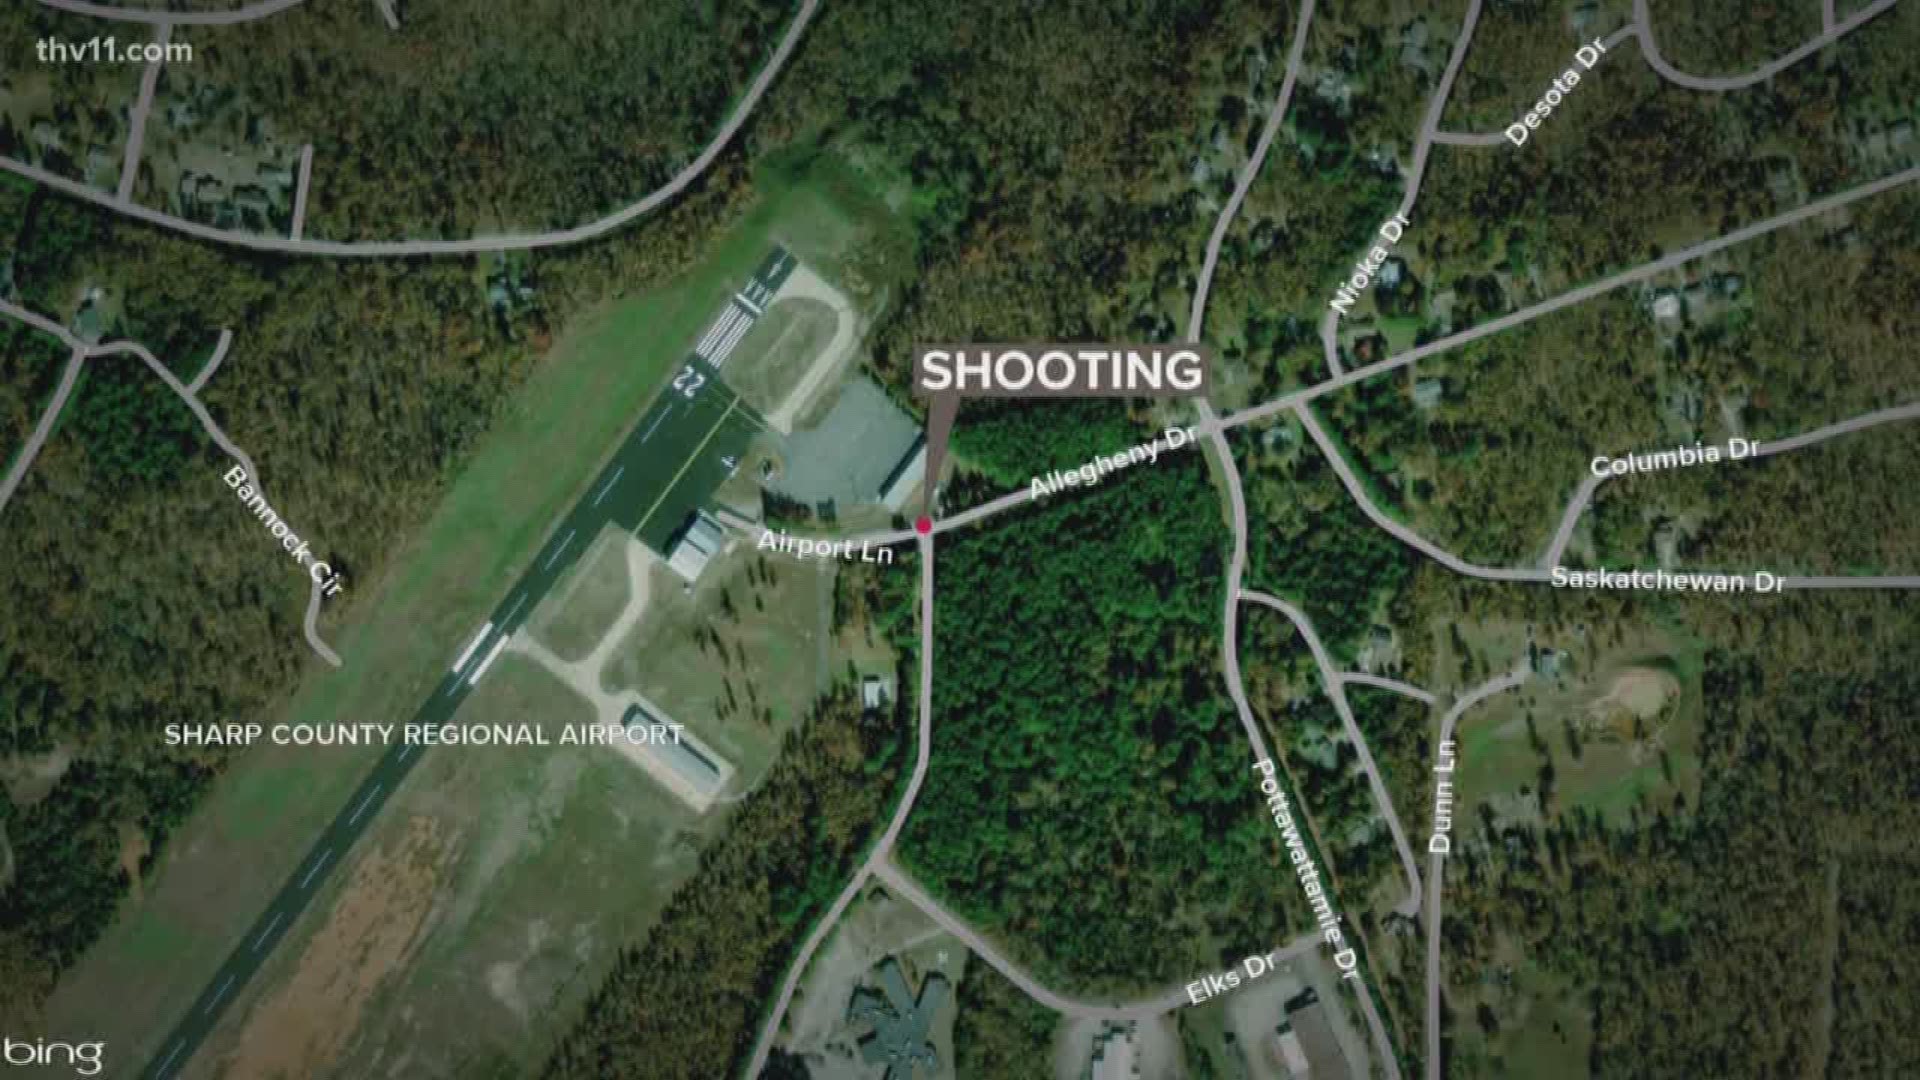 State police are investigating an officer involved shooting in sharp county that hospitalized the suspect.